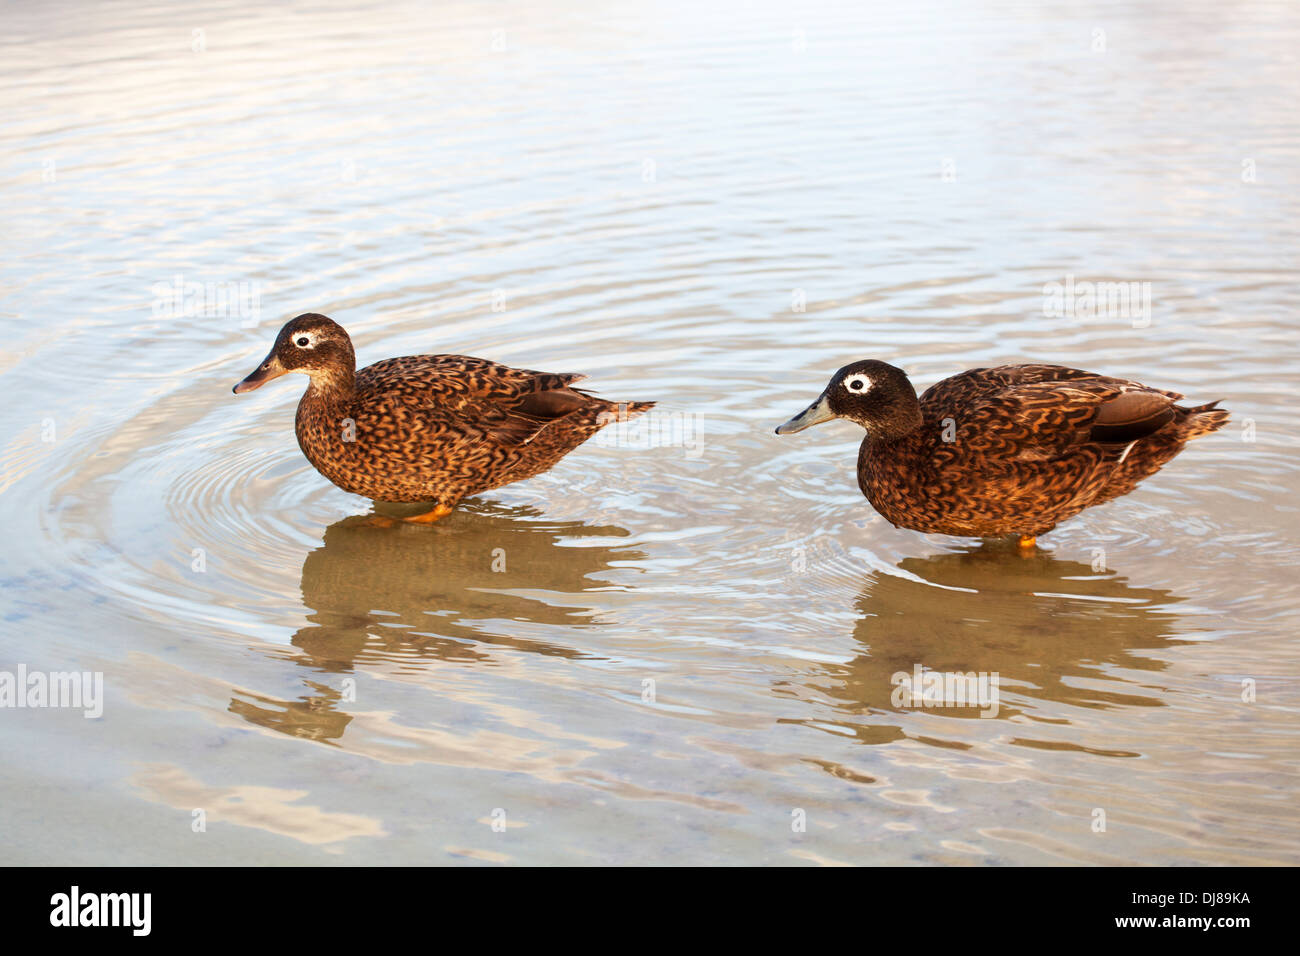 Laysan Duck pair wading in pond water on Midway Atoll. Anas laysanensis. Critically endangered species Stock Photo